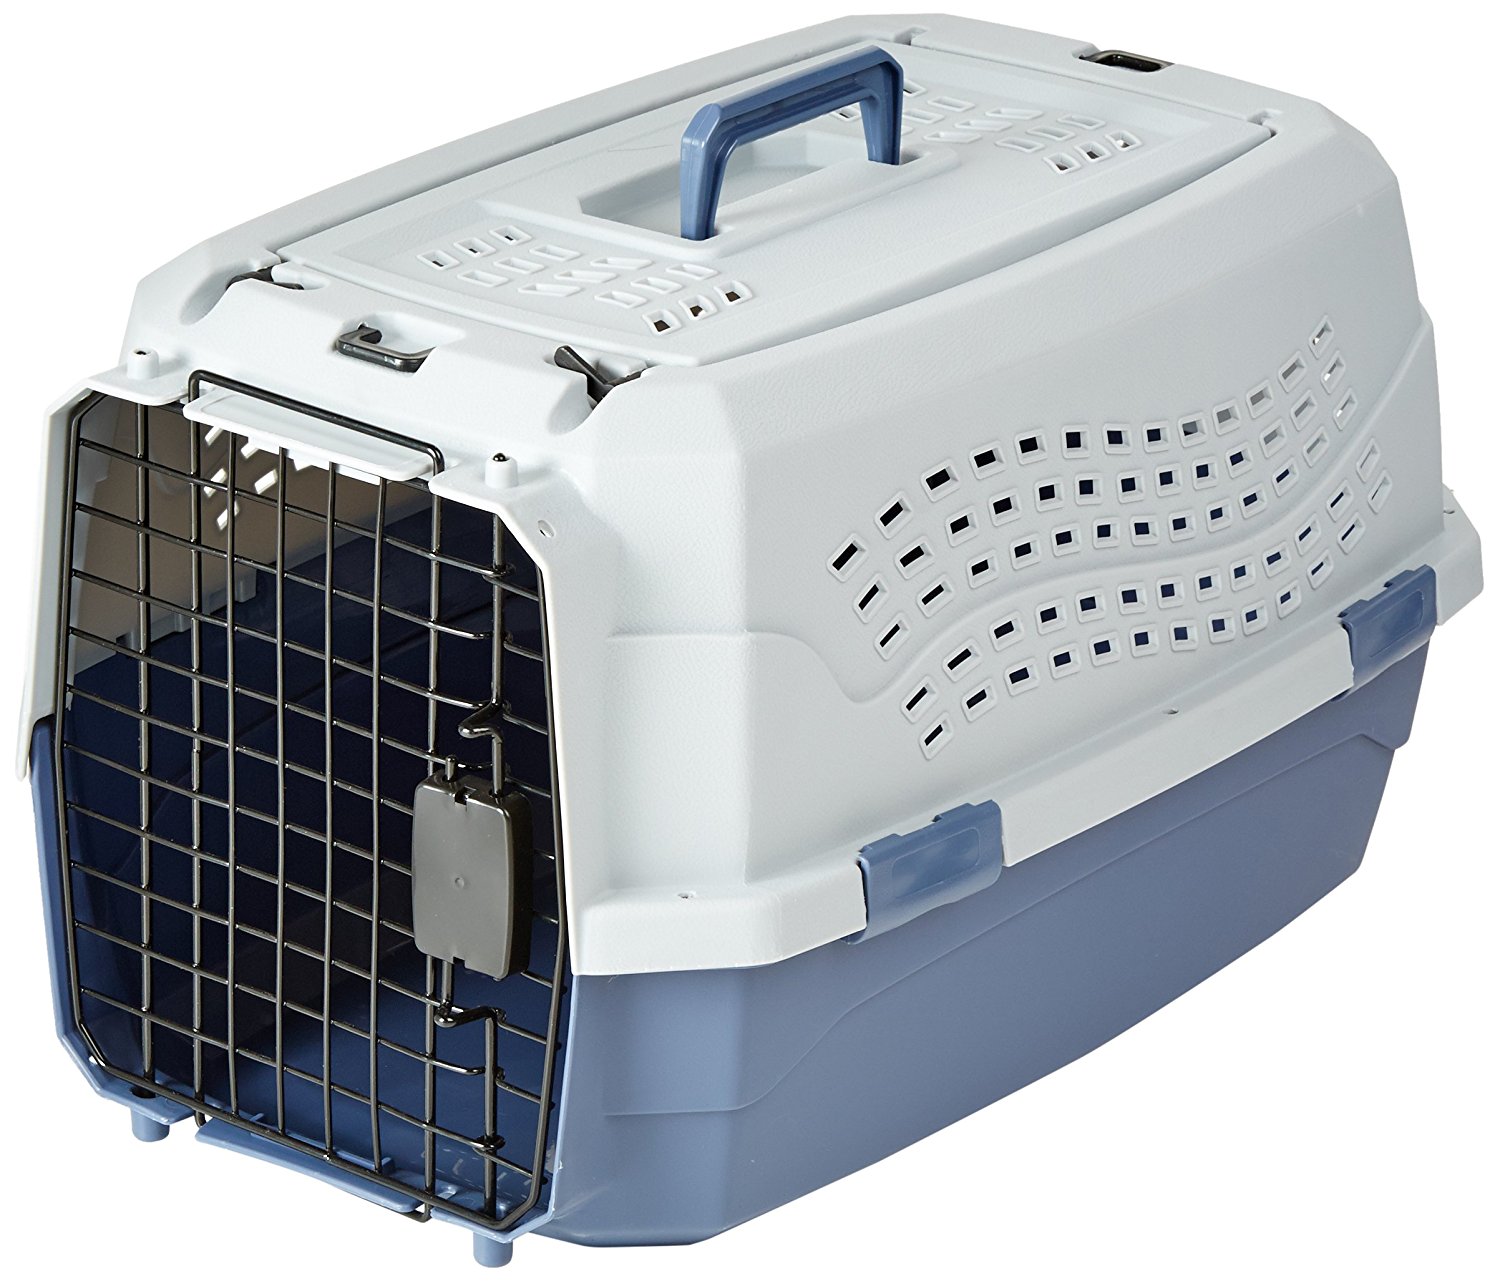 AmazonBasics Two Door Top Load Pet Kennel (23-inch) Price in India